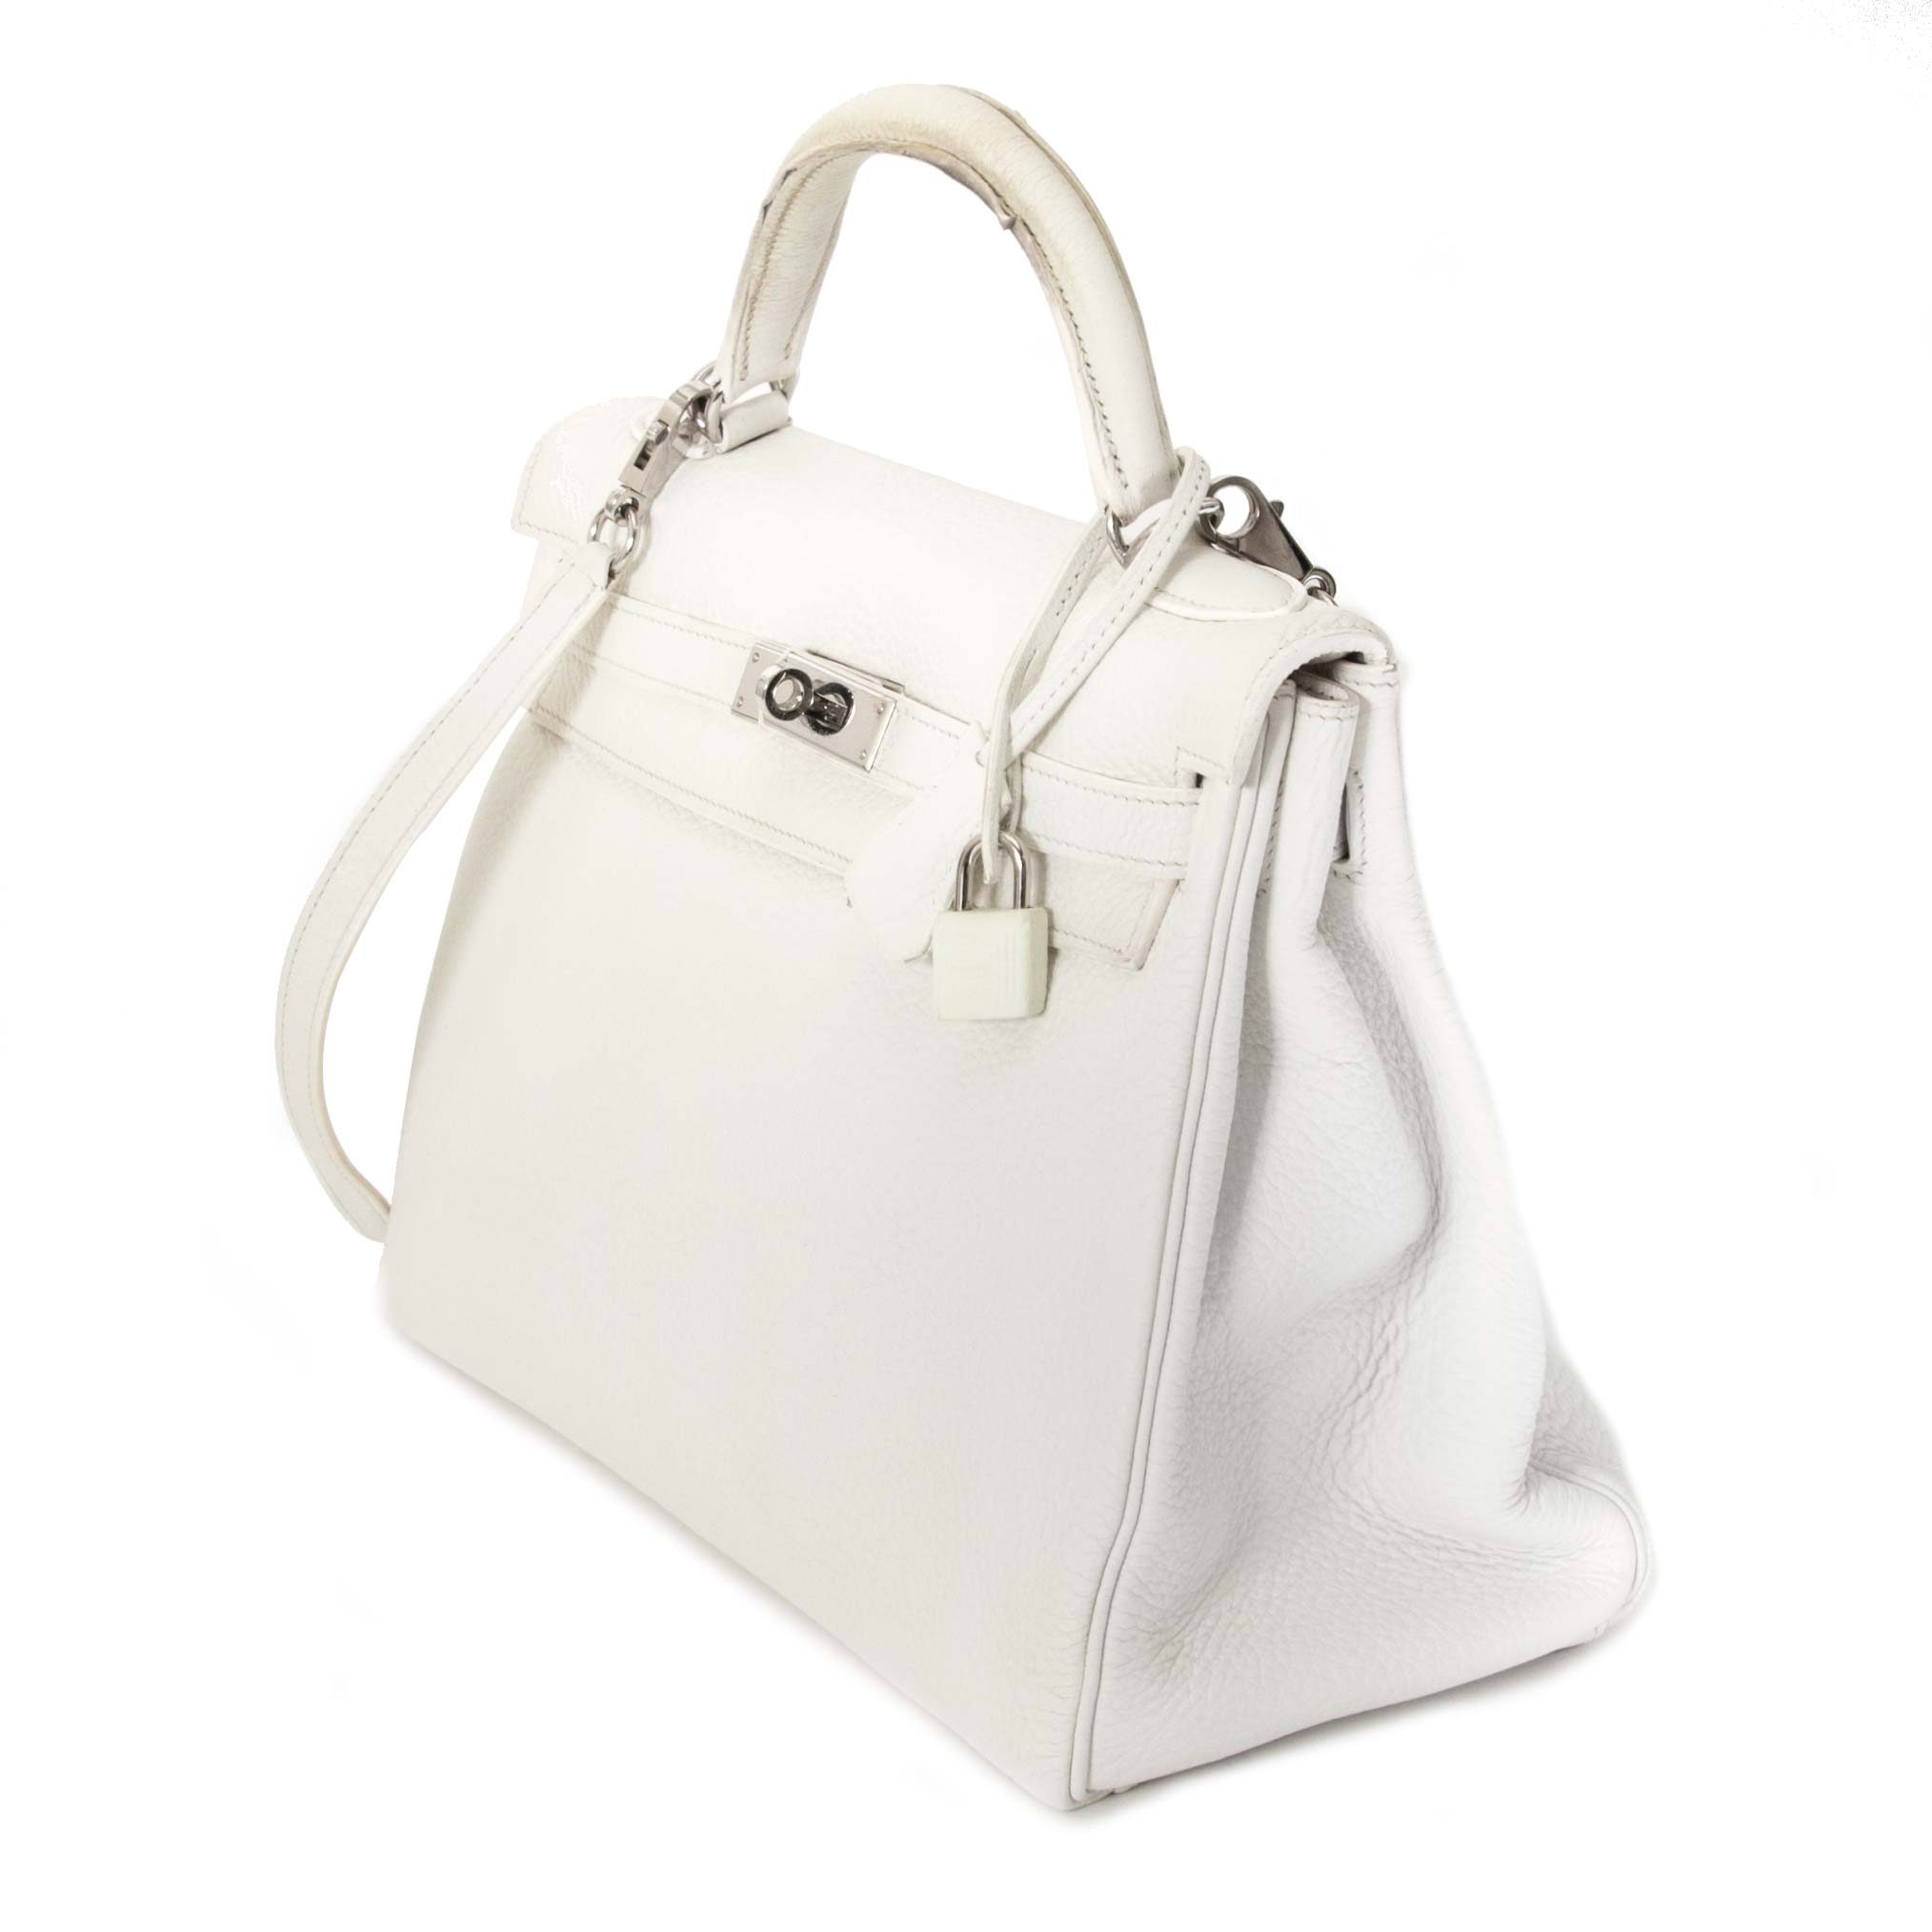 Hermes Anemone Ghillies Kelly 32 Bag W/ Twilly – The Closet